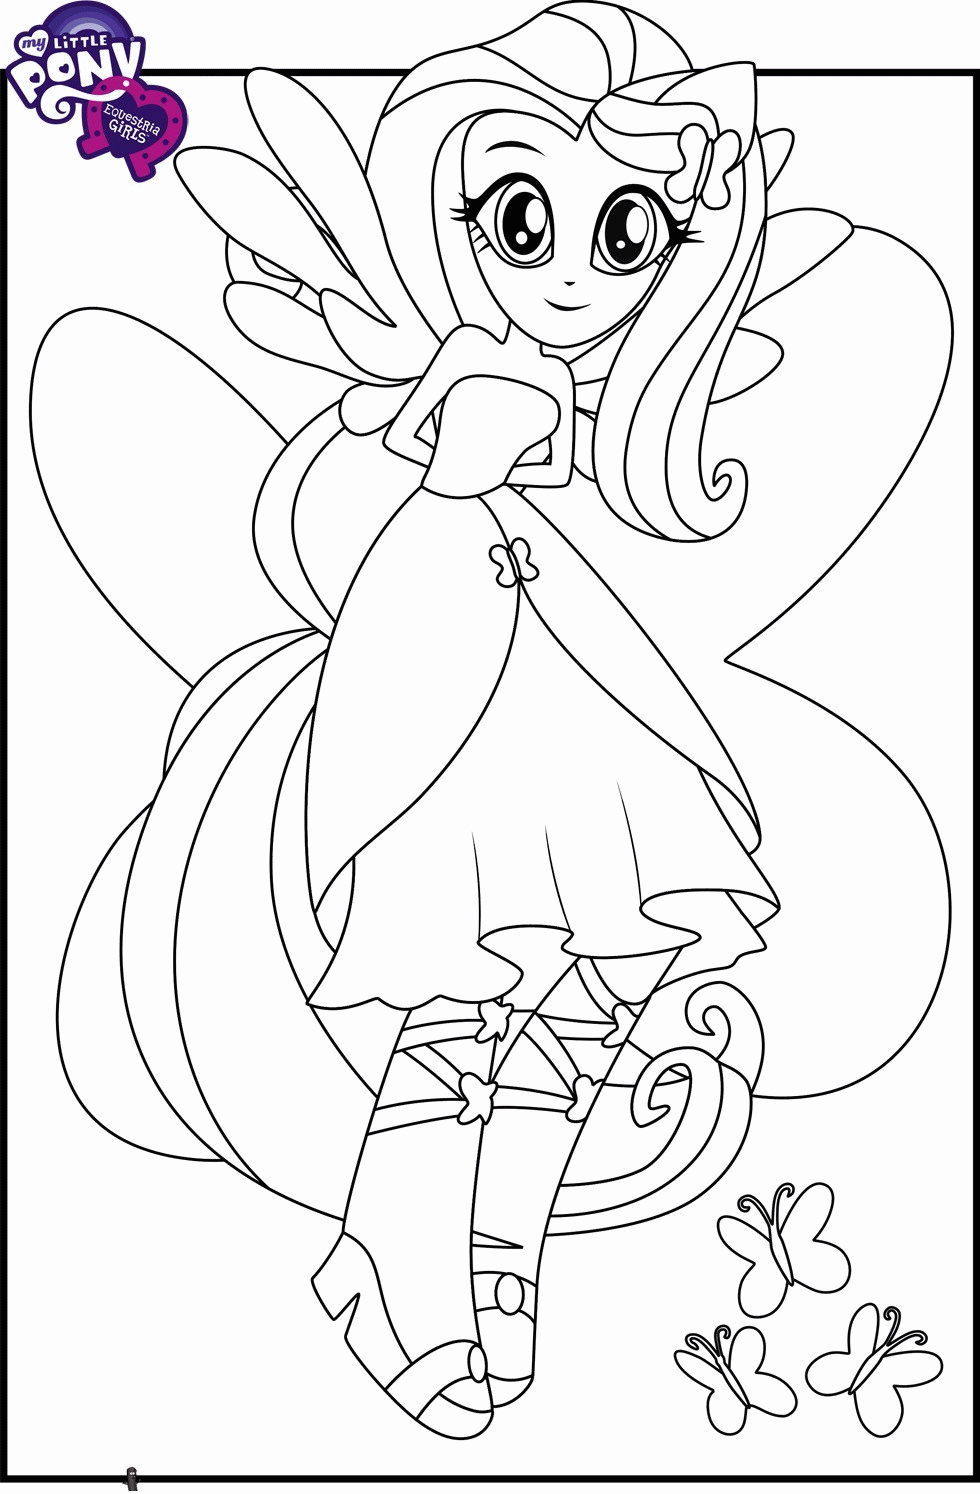 my-little-pony-equestria-girl-coloring-pages-to-print-3.jpg